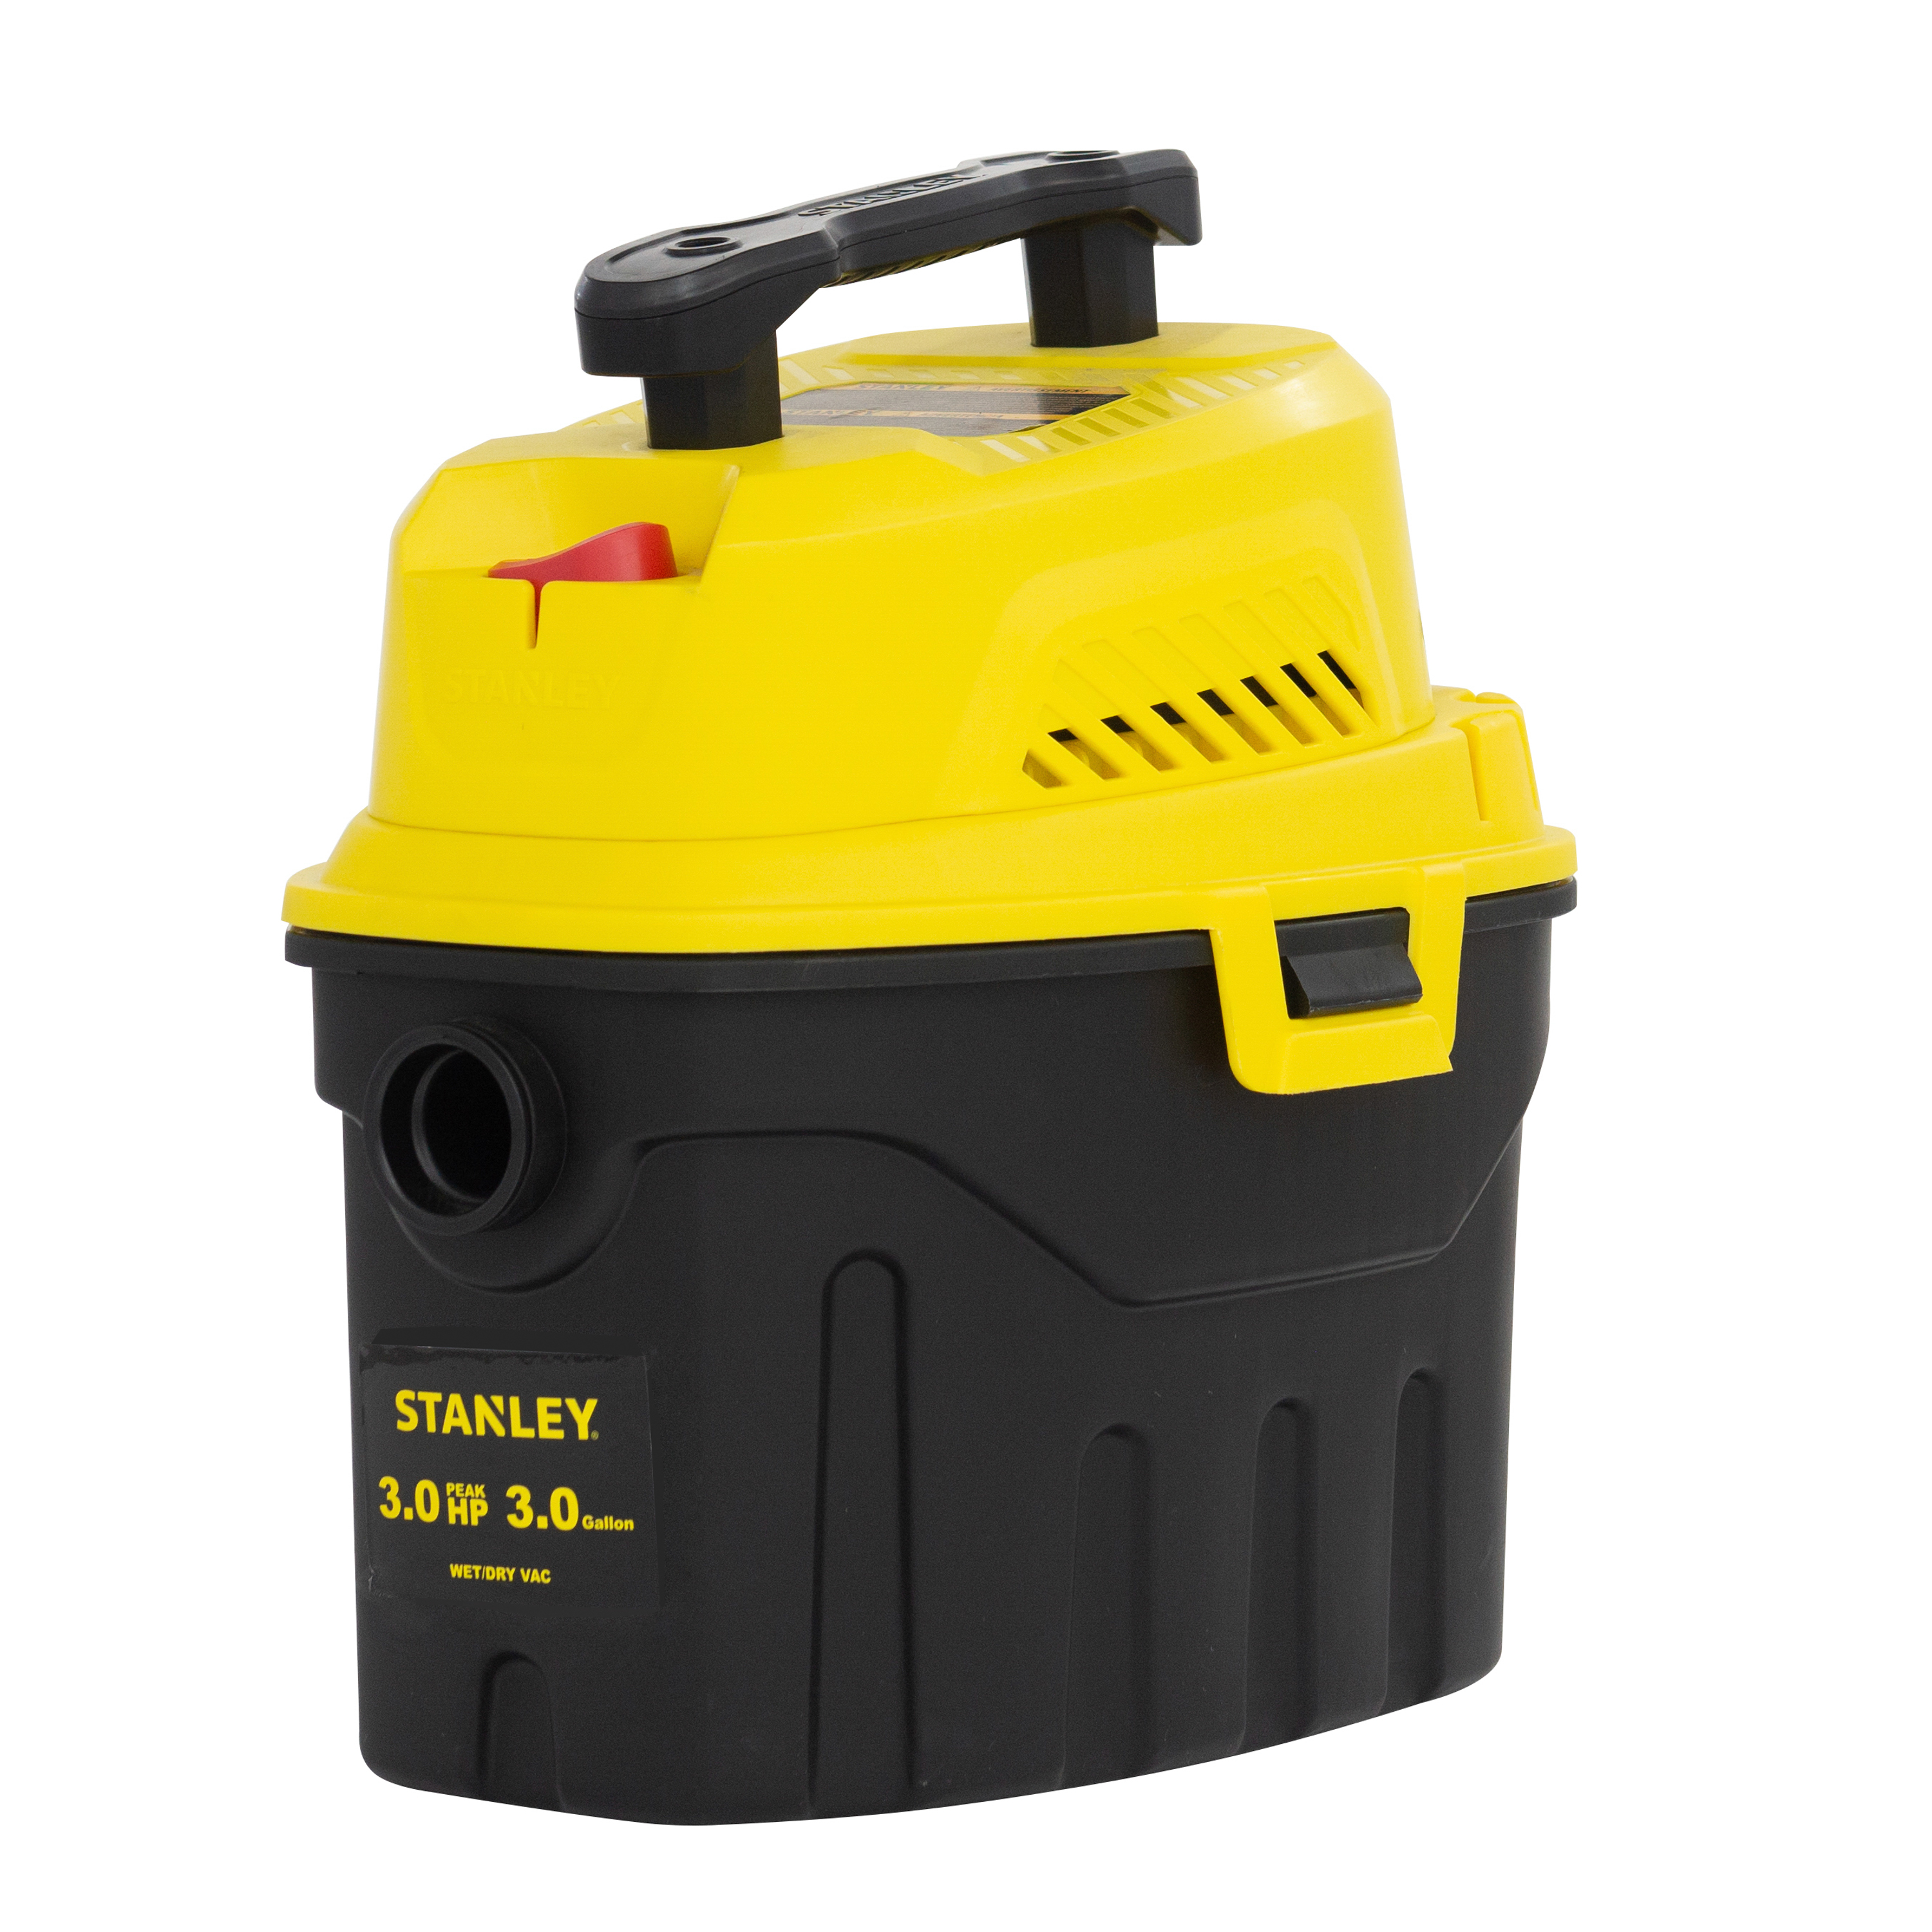 STANLEY 3G, 3.0HP POLY WET DRY VAC